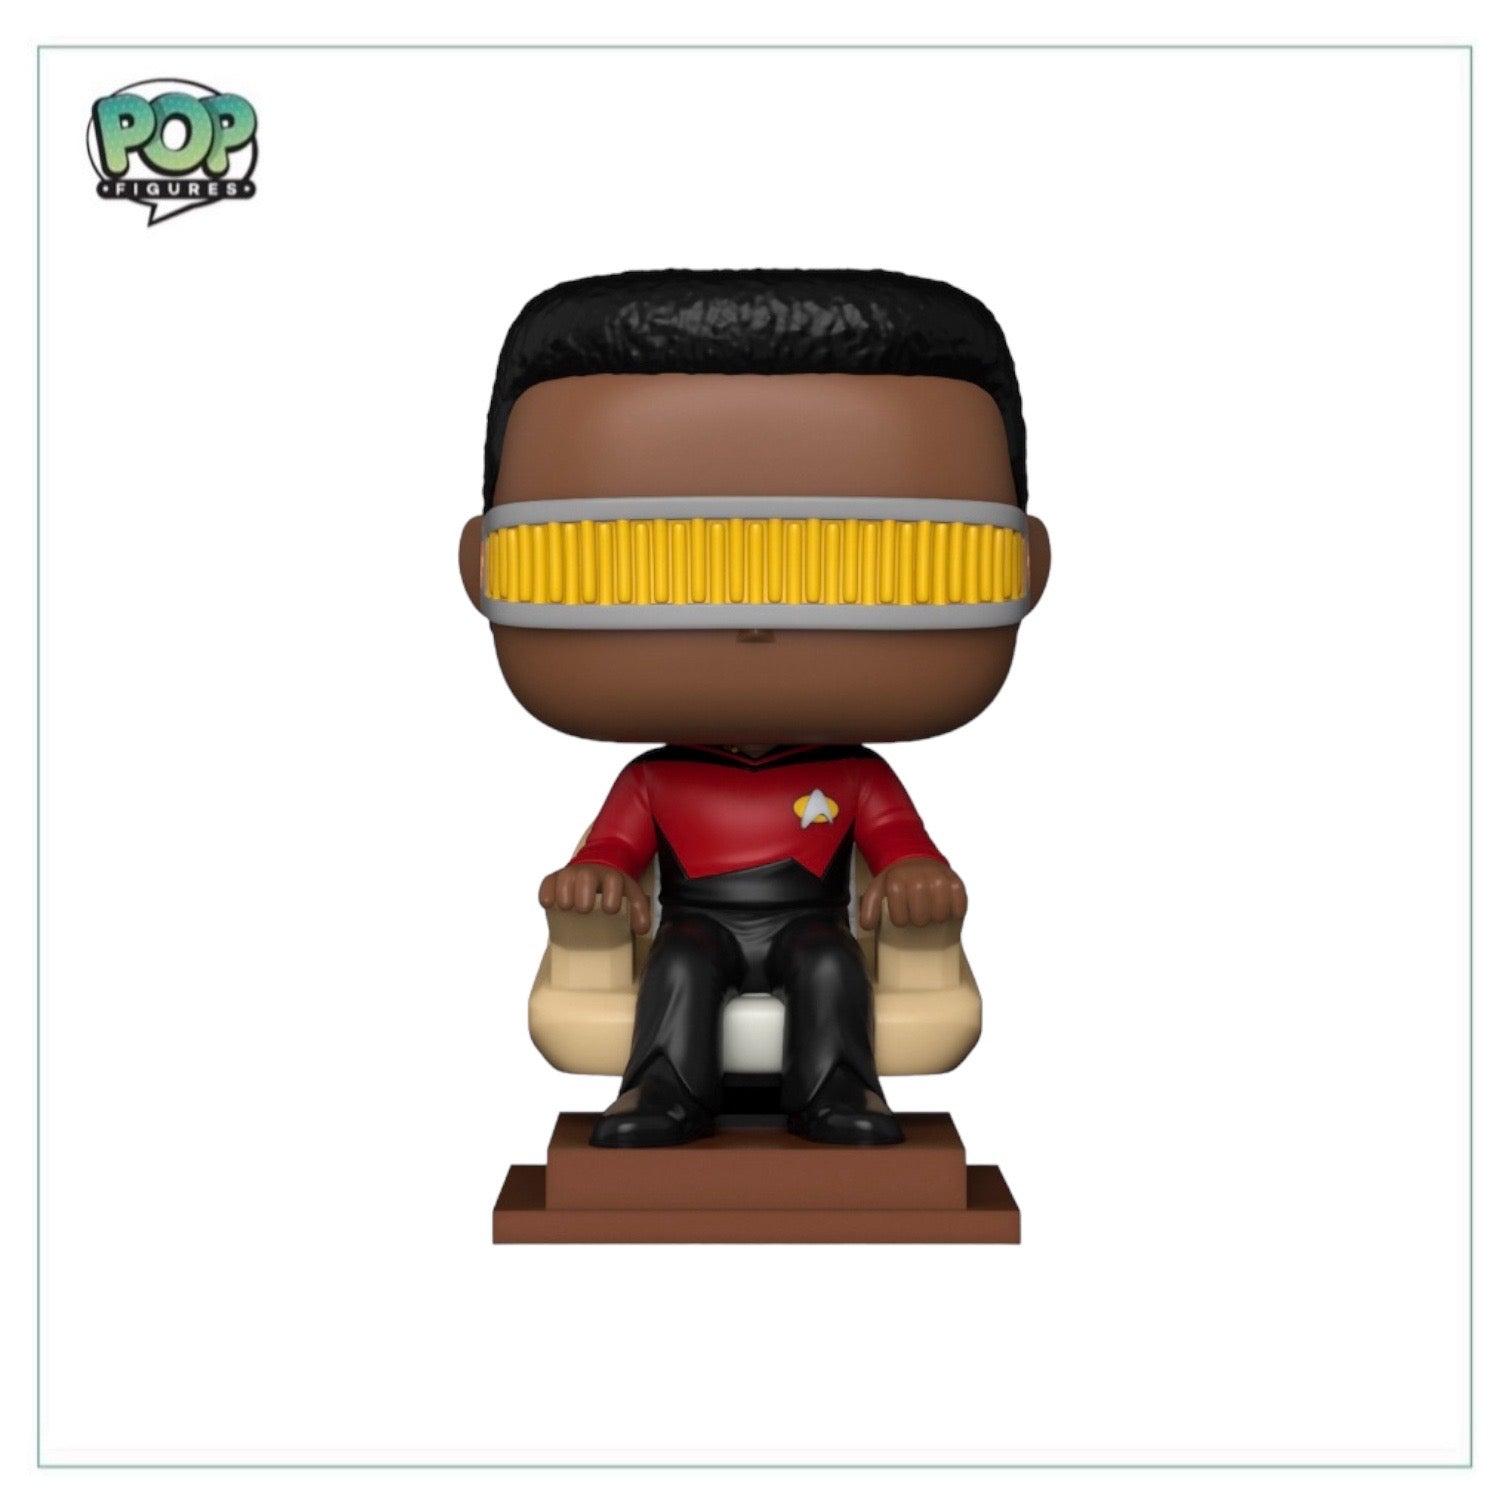 Geordi La Forge #1409 (In Chair) Funko Pop! - Star Trek: The Next Generation - NYCC 2023 Shared Exclusive